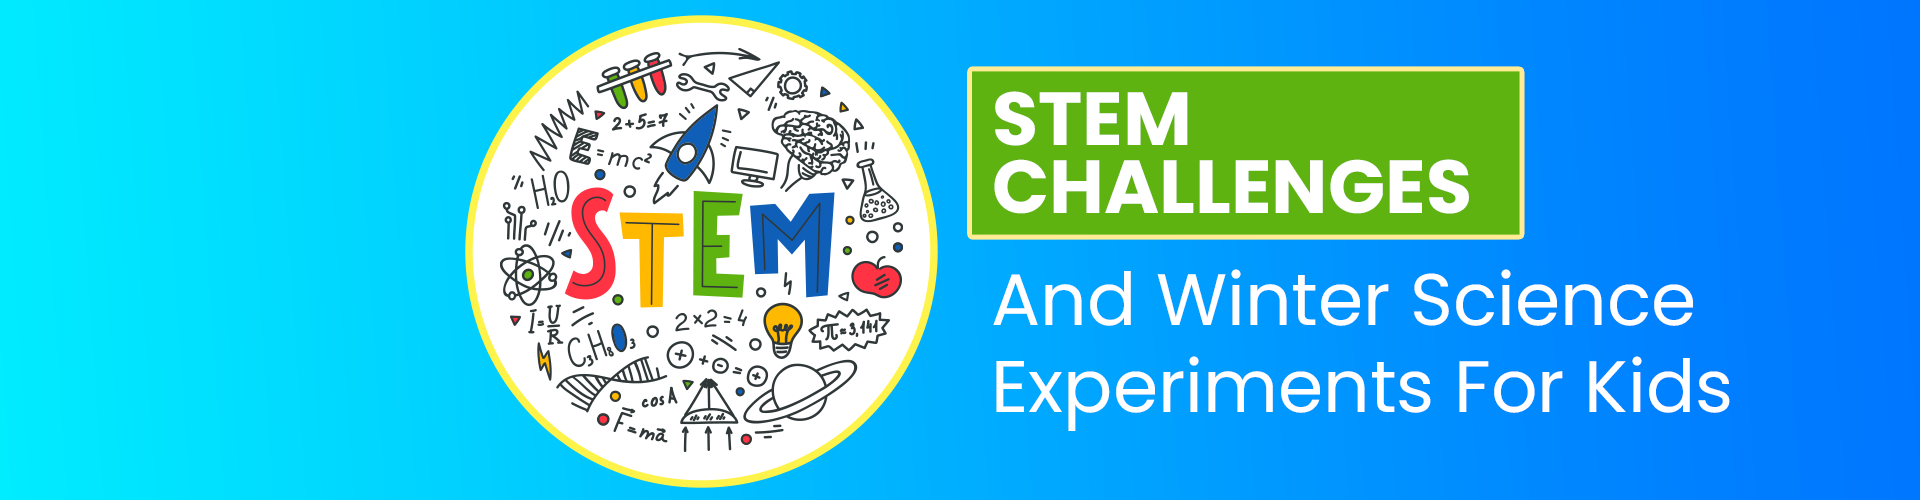 Exciting STEM Challenges And Winter Science Experiments For Kids